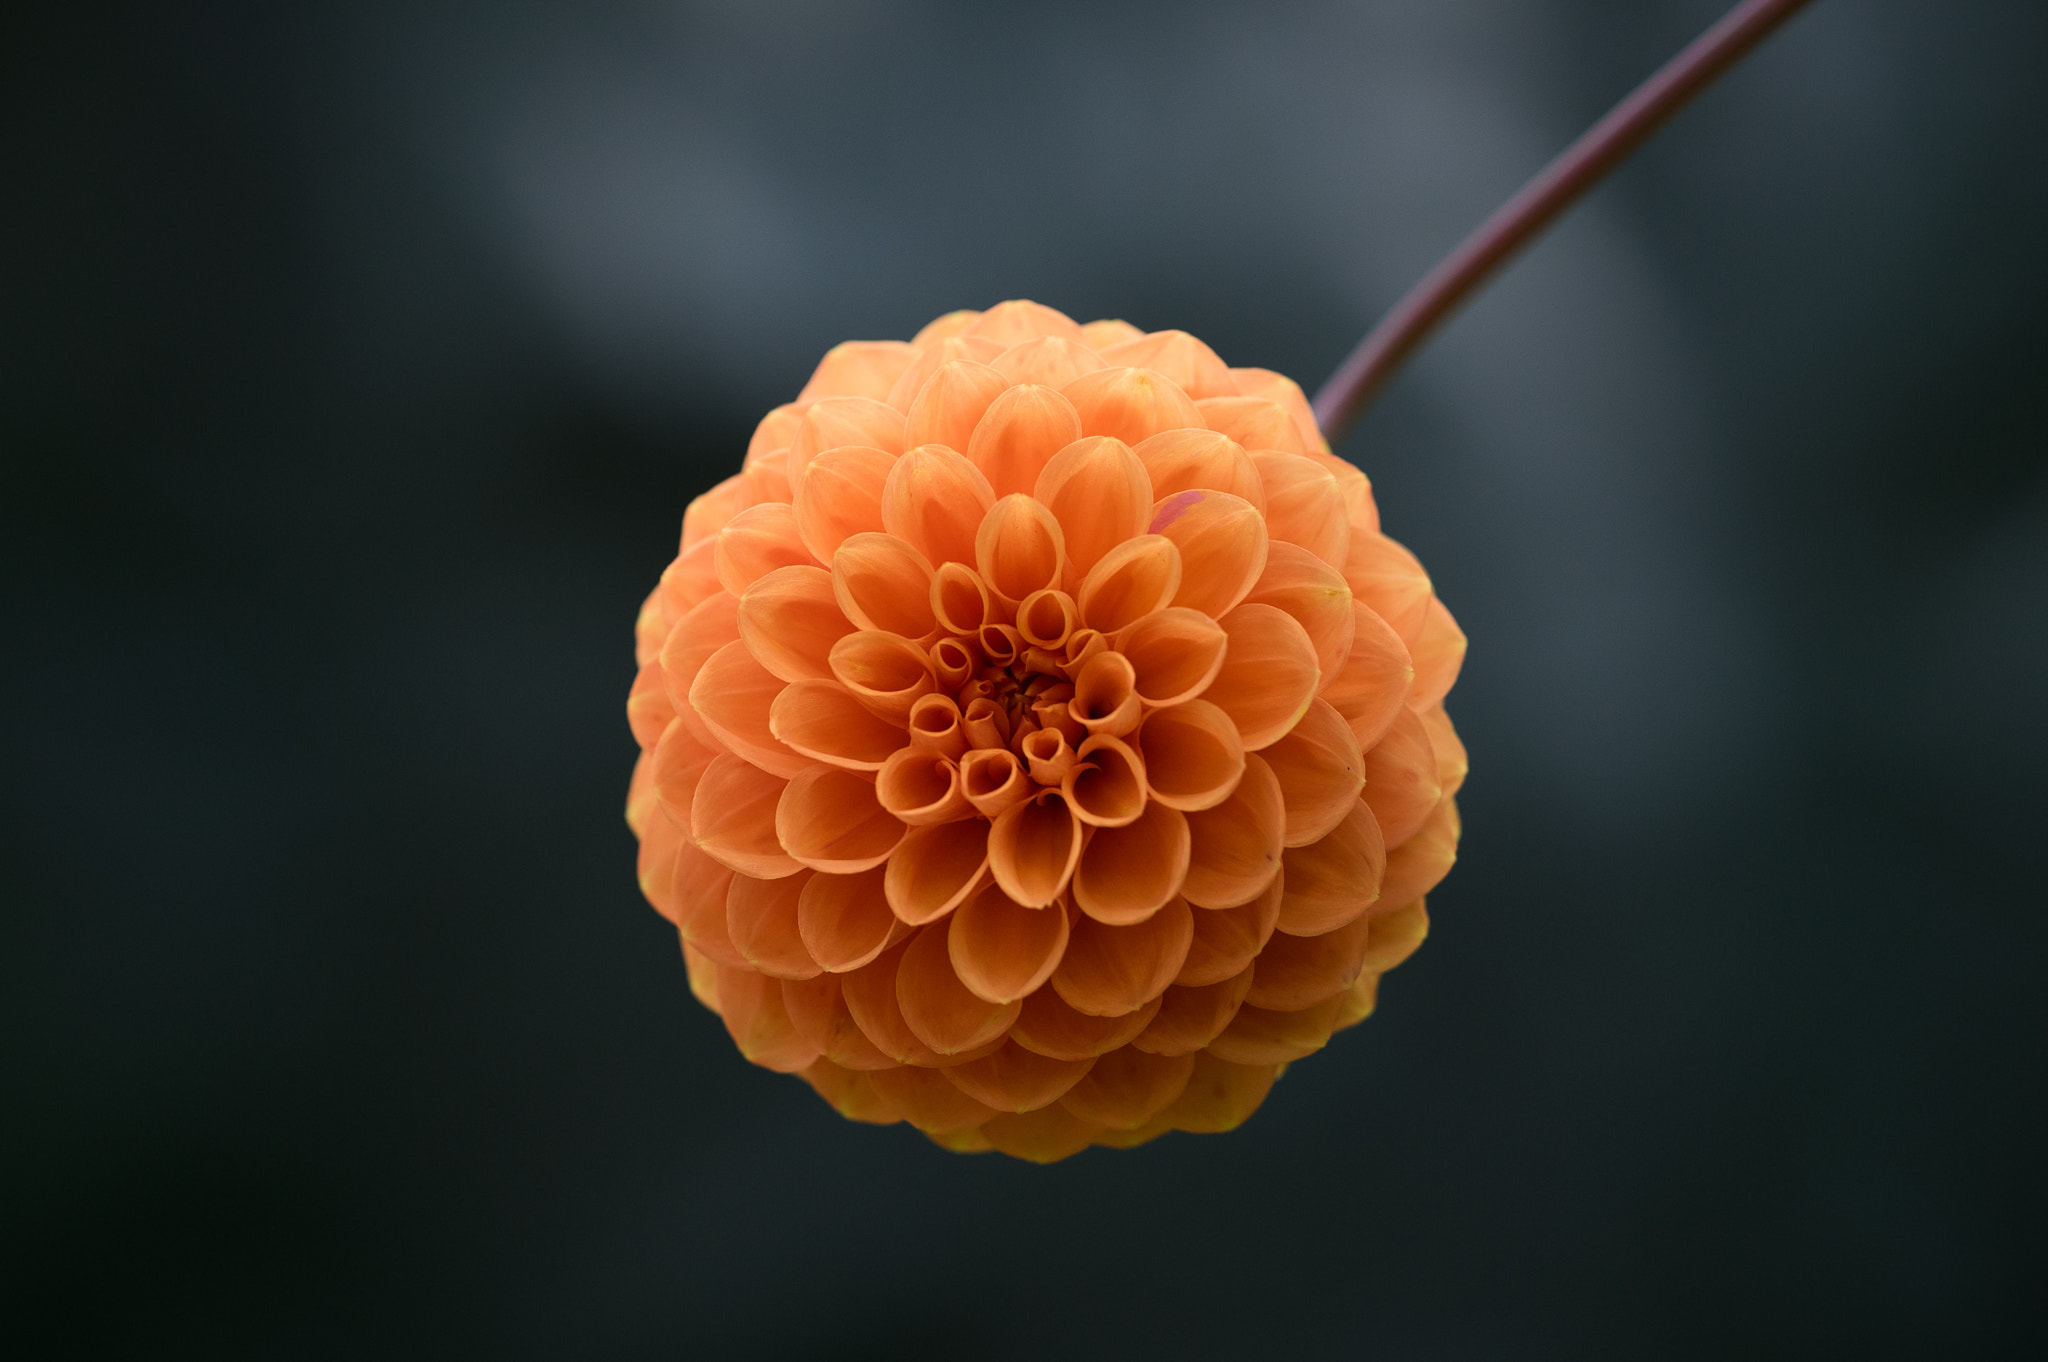 Pentax K-3 II sample photo. Time for a flower photography